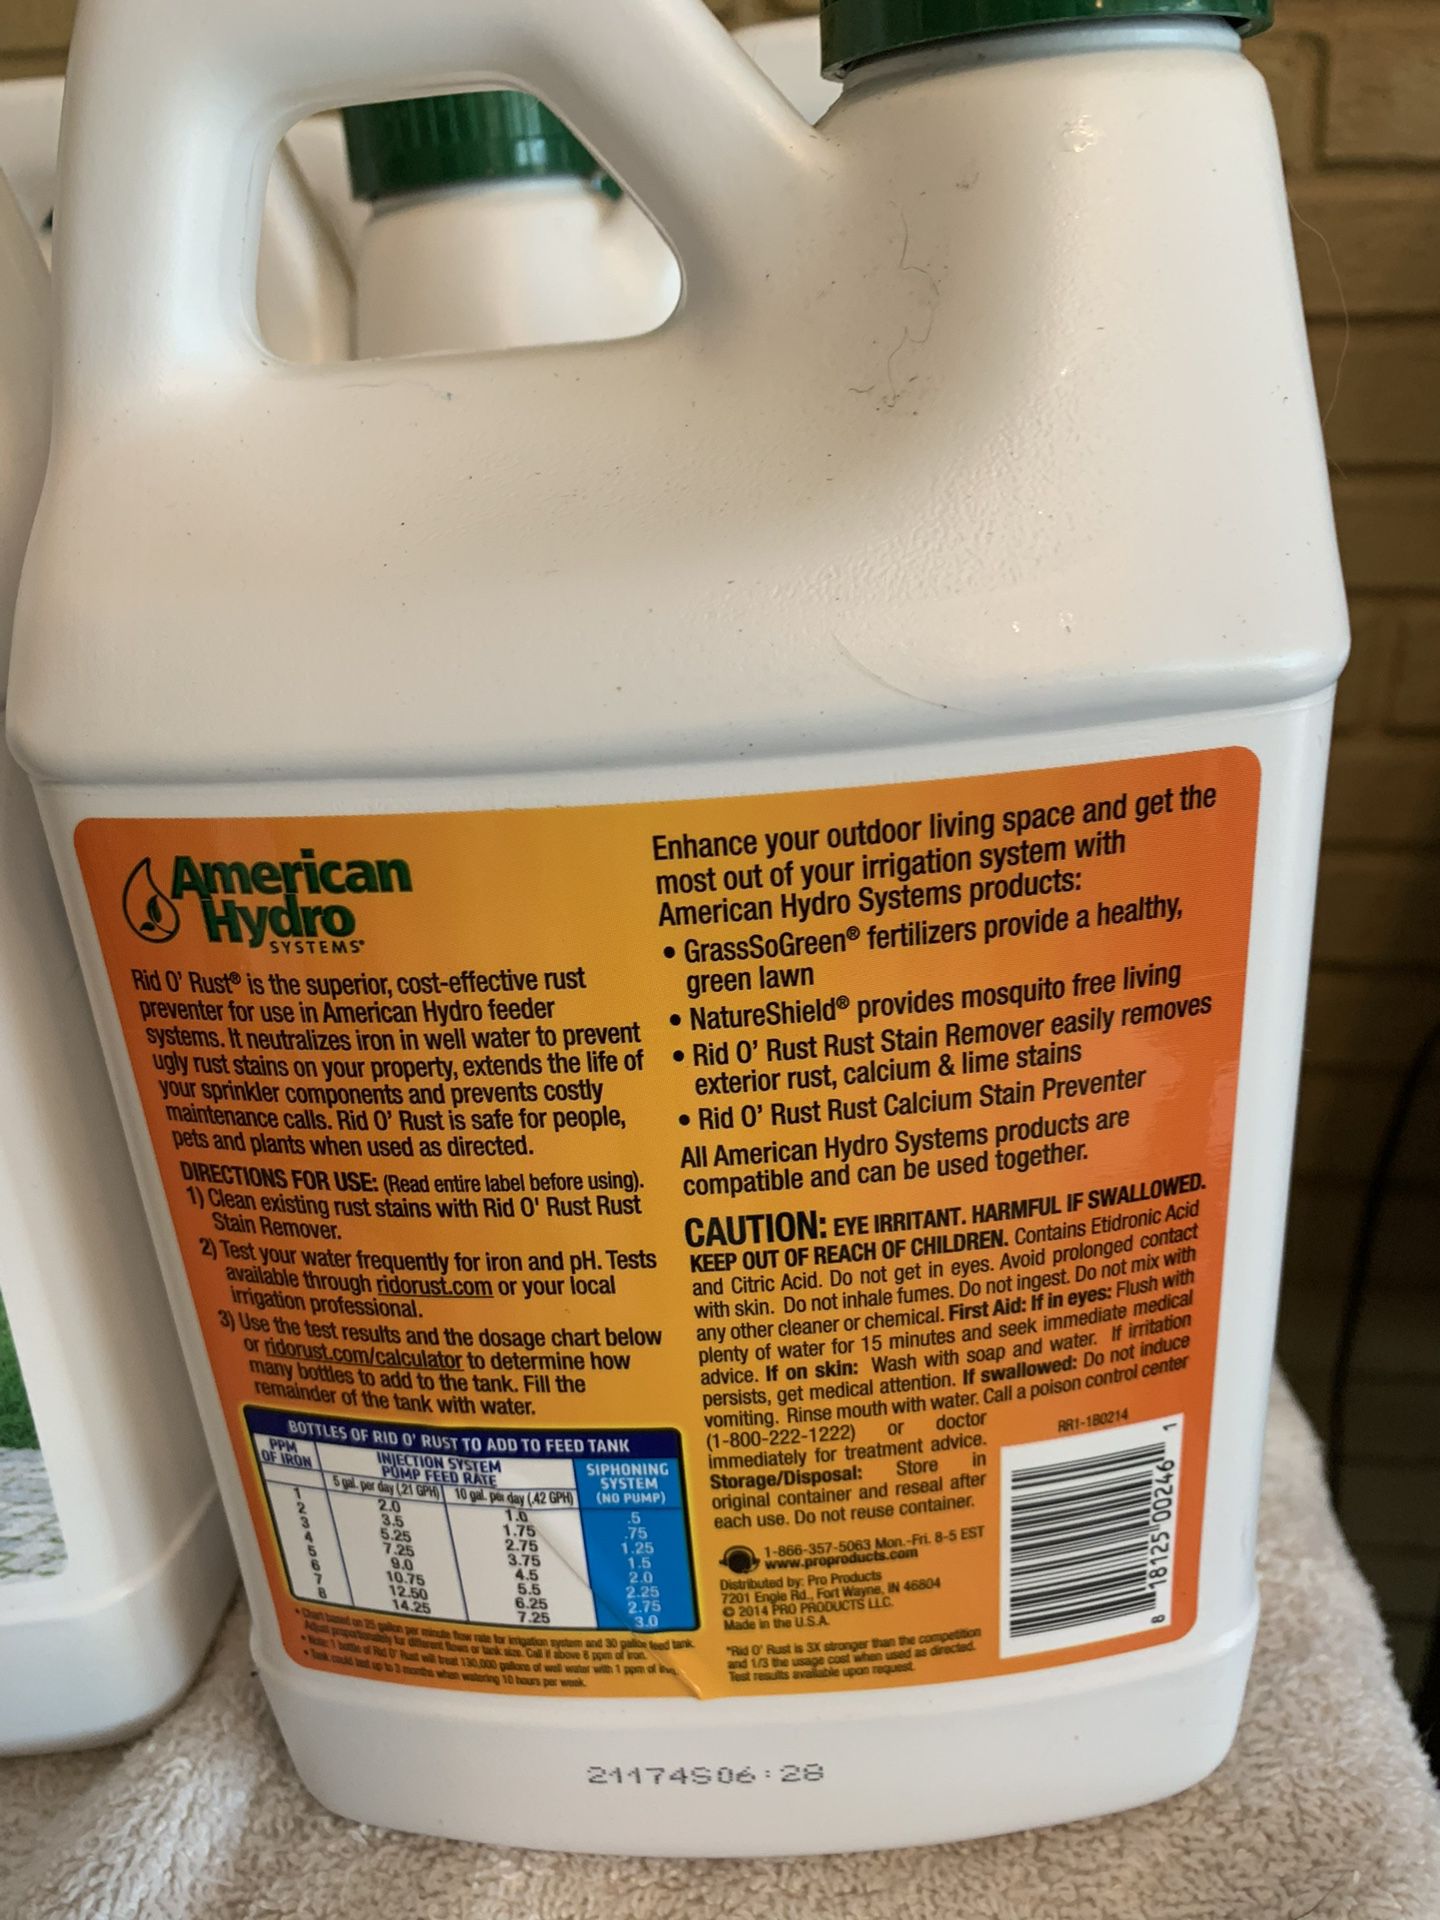 New American Hydro Systems Rid O Rust Ridorust Rust Preventer Concentrated  64 Oz Bottles $20 EACH Firm for Sale in Fort Lauderdale, FL - OfferUp